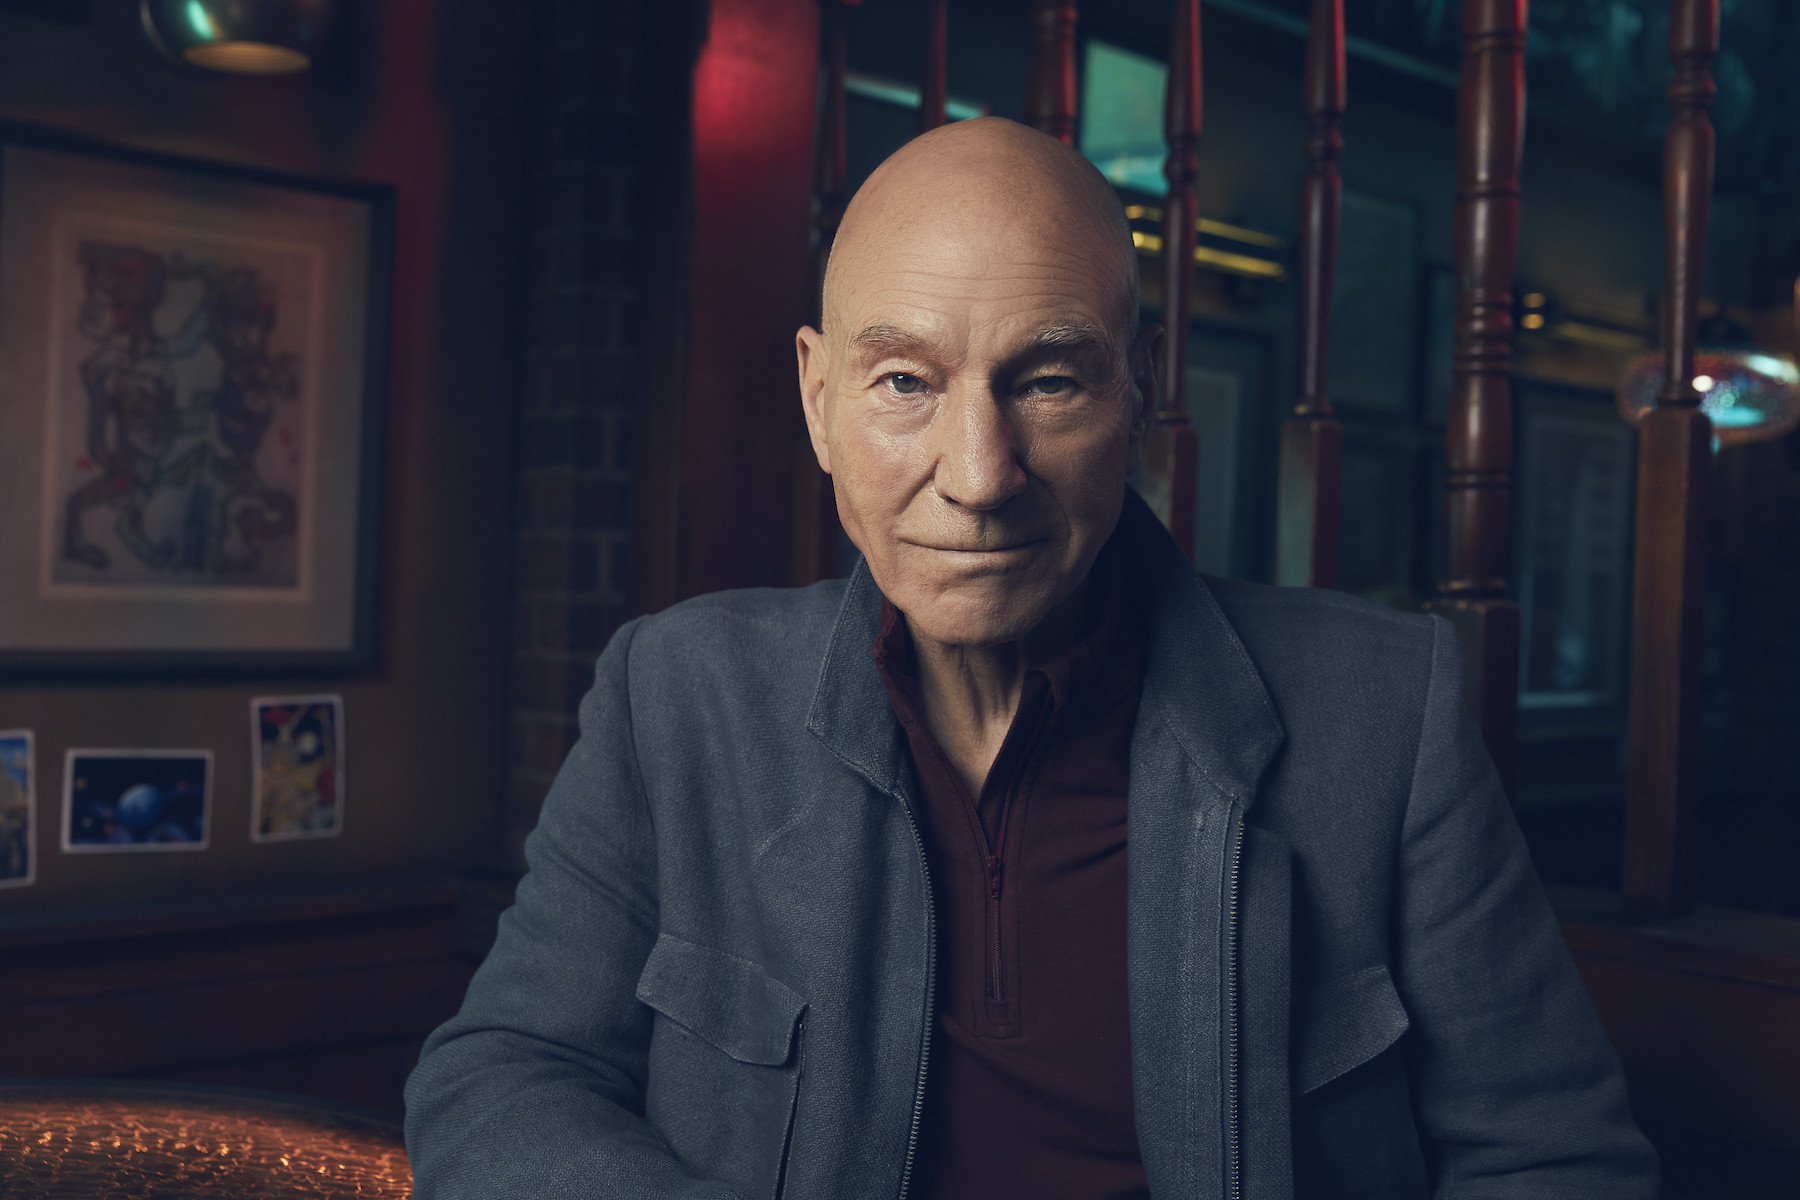 Pictured: Sir Patrick Stewart as Jean-Luc Picard of the Paramount+ original series `Star Trek: Picard.` (Photo Cr: Sarah Coulter/Paramount+ ©2022 ViacomCBS. All rights reserved.)